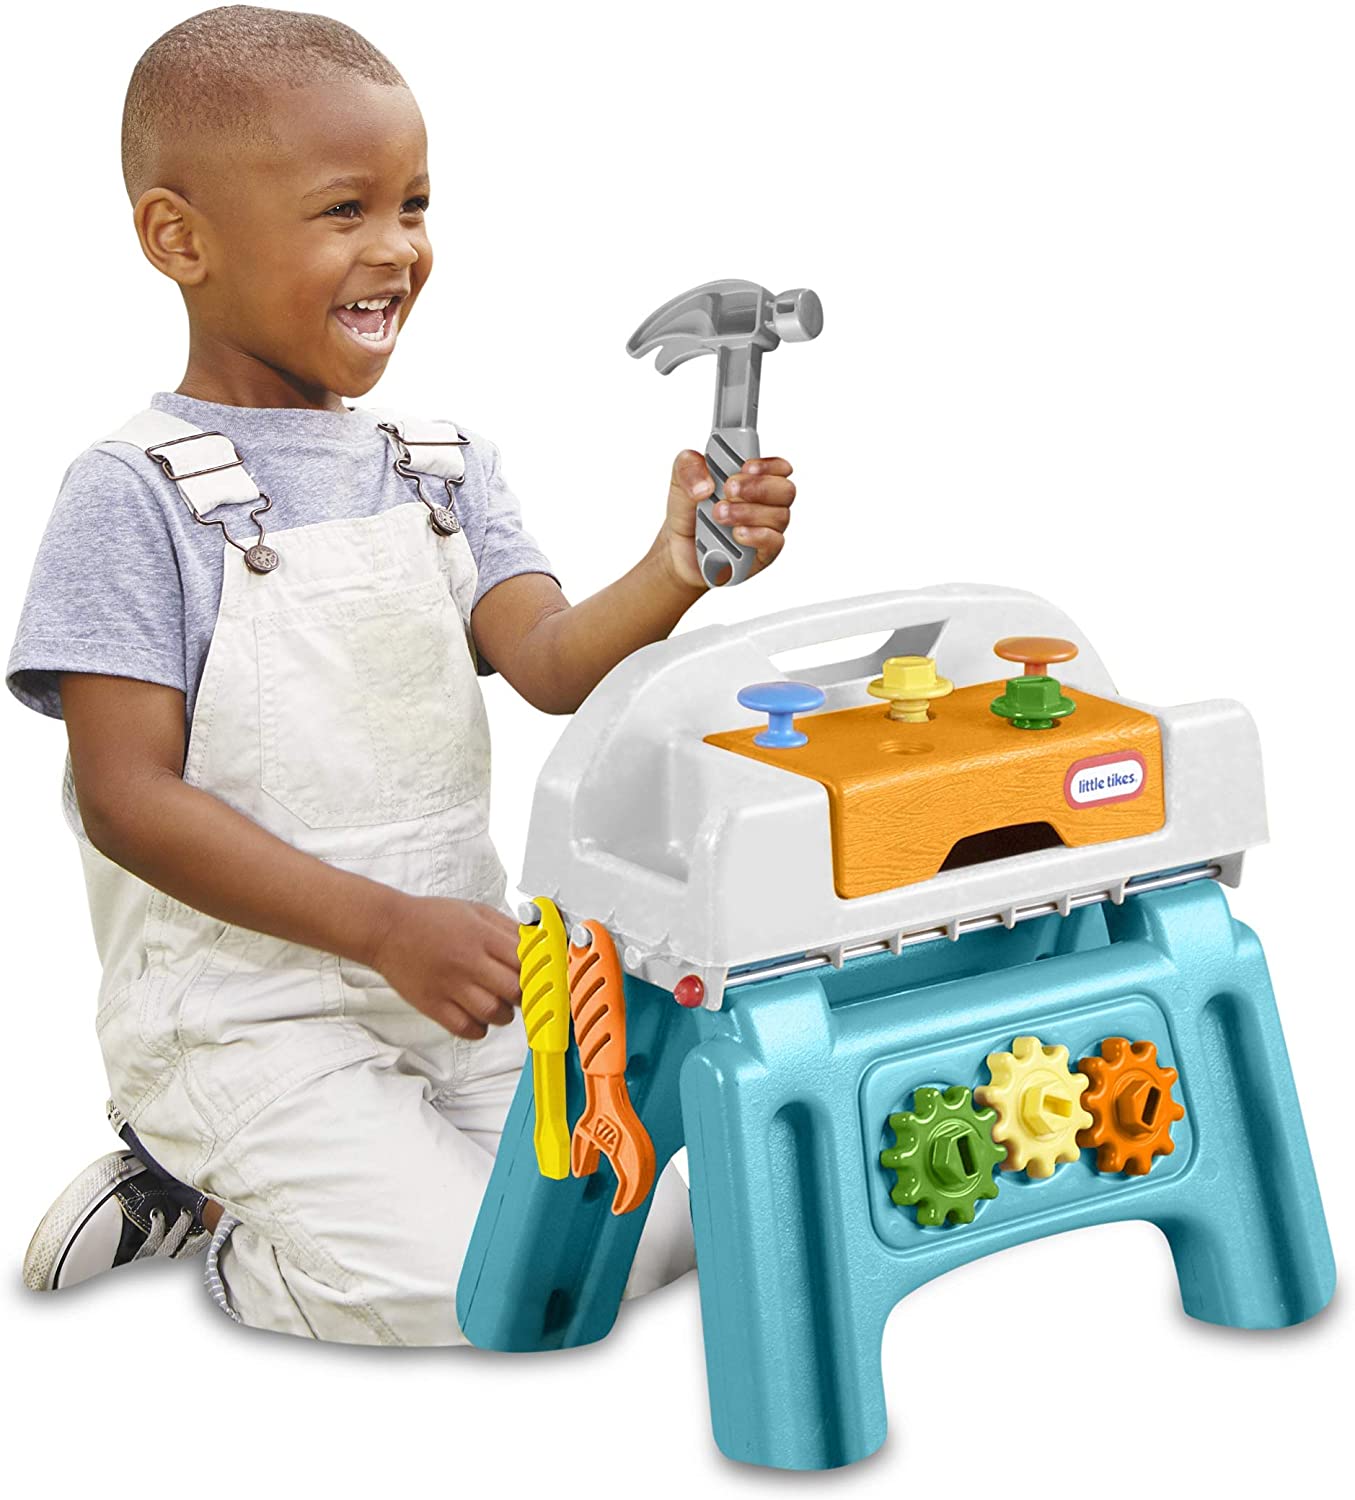 Little Tikes First Tool Bench Pretend Workbench for Kids $11.96 ~ Amazon or Macy's